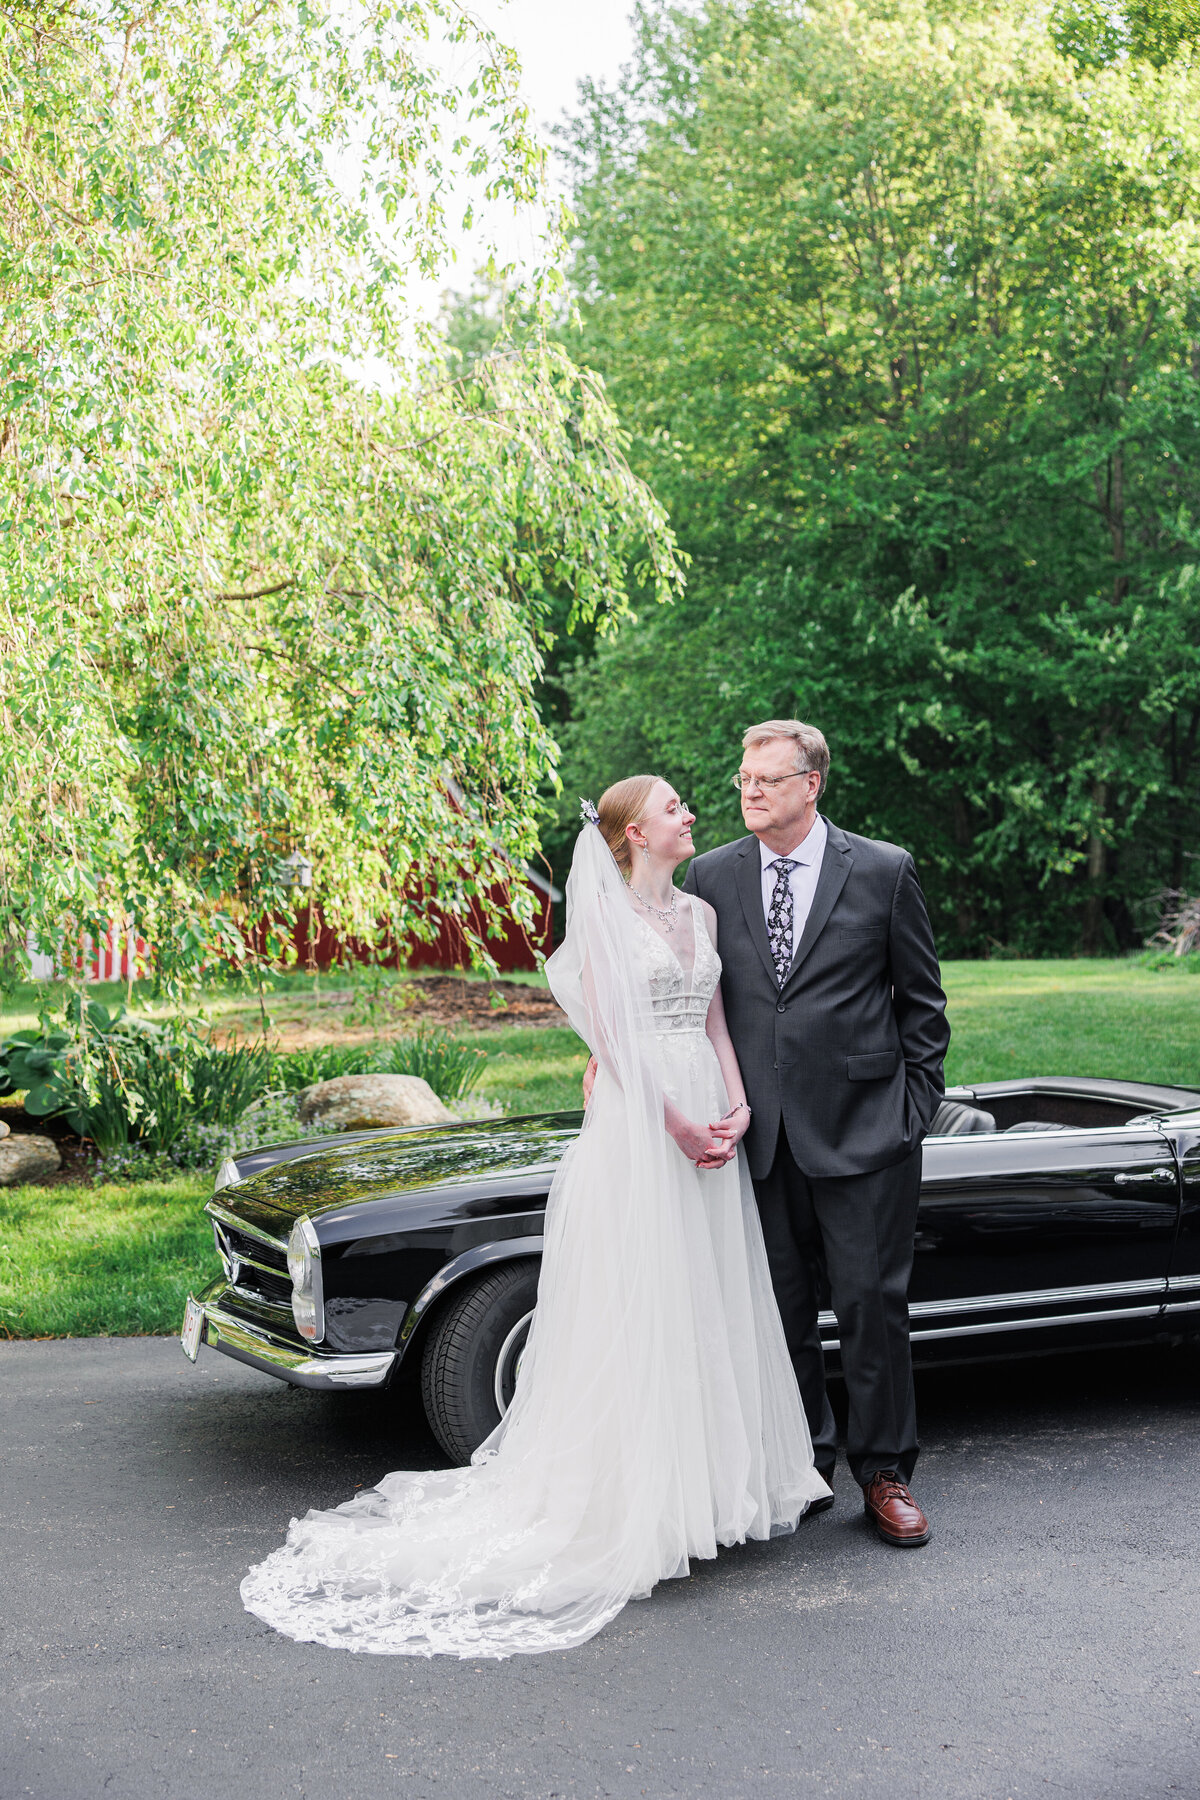 Bride and her father posing in front of a vintage car during her Boylston, MA wedding